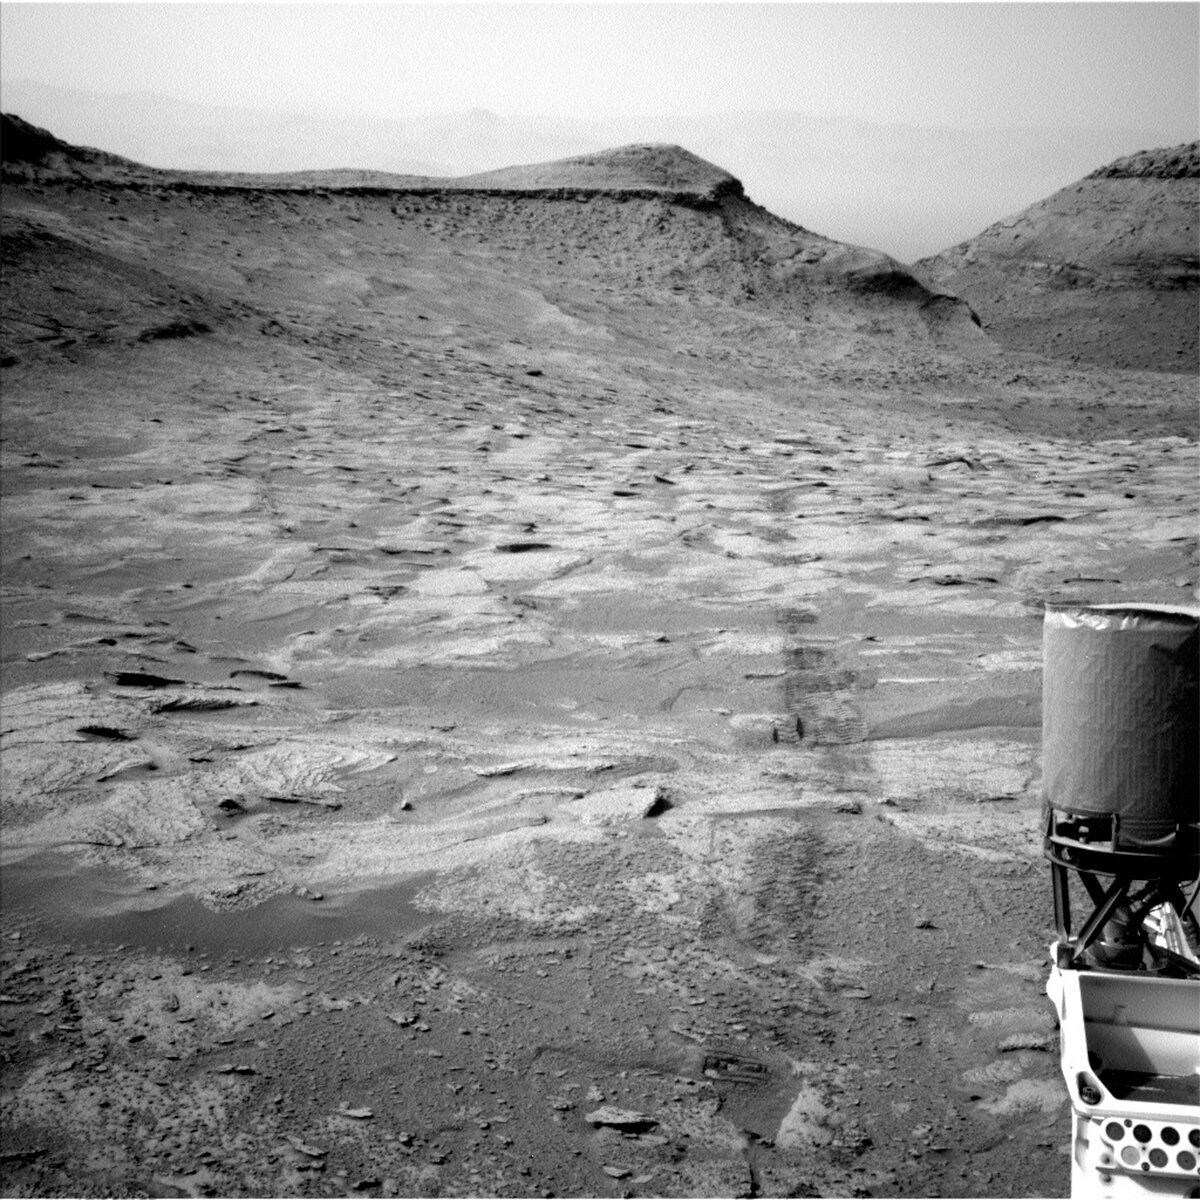 This image showing part of the Curiosity rover and Martian hills ahead was taken by Left Navigation Camera onboard Curiosity on Sol 3708.